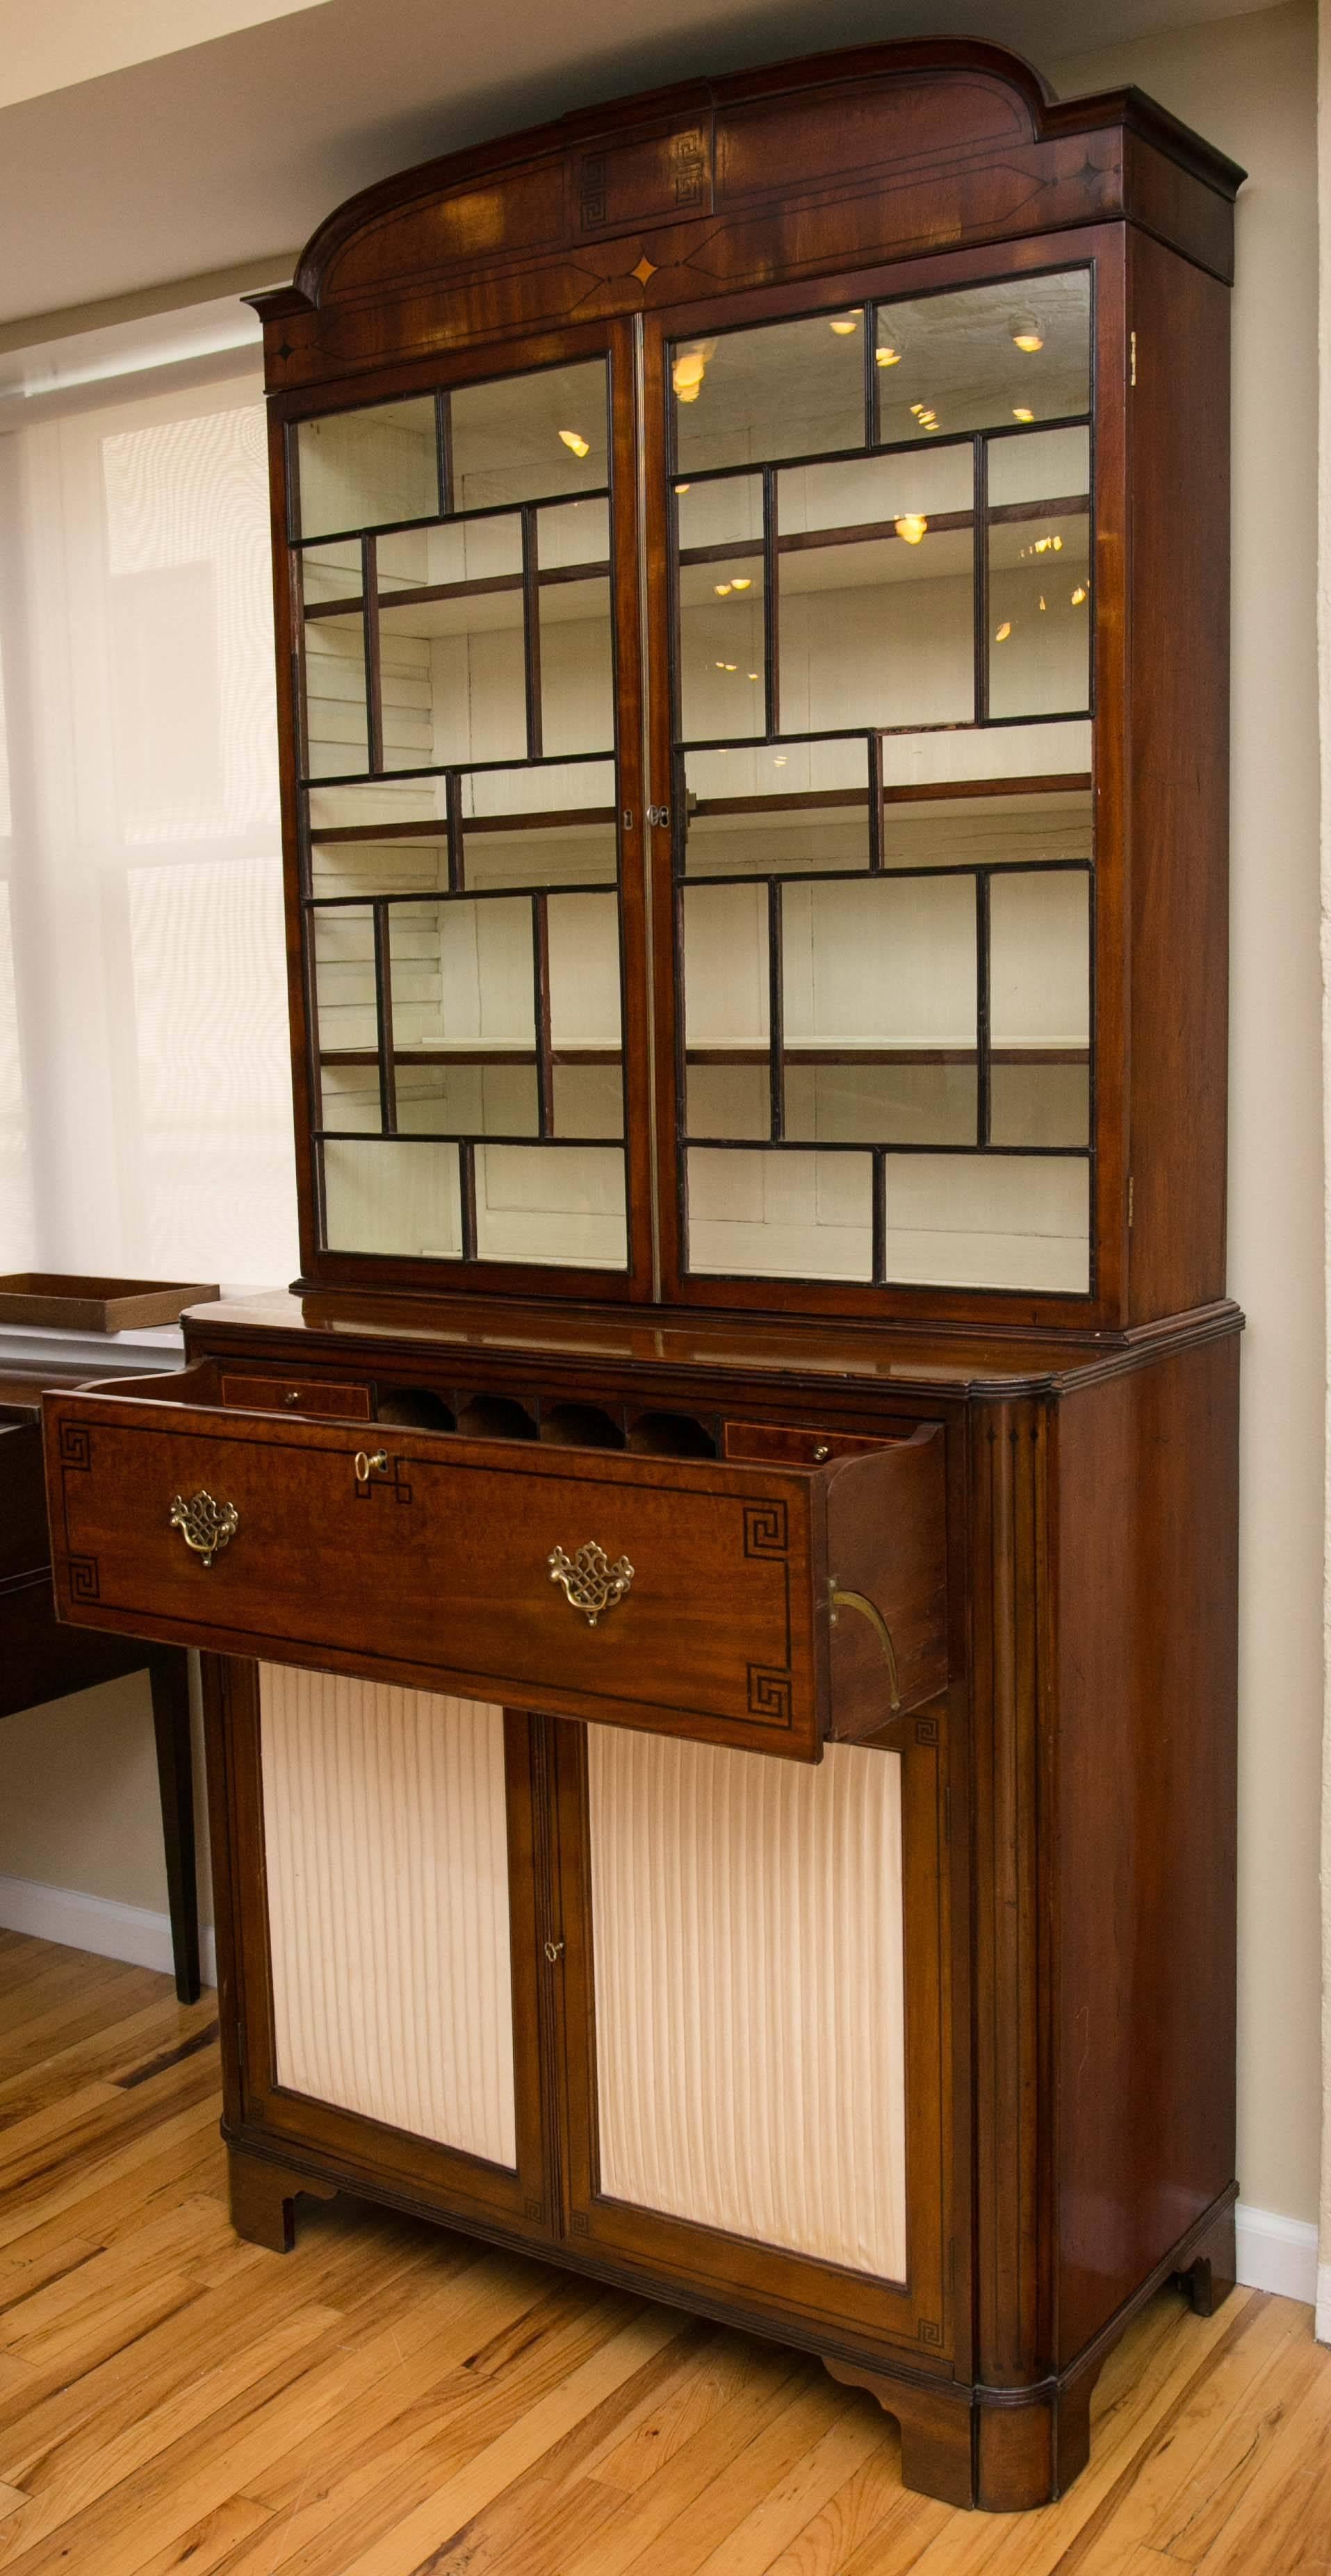 Mahogany secretaire bookcase, domed cornice with applied mouldings over geometric glazed doors enclosing adjustable shelving. Secretaire drawer inlaid with an ebony Greek key motif and fitted with arrangement of pigeon holes and small satinwood